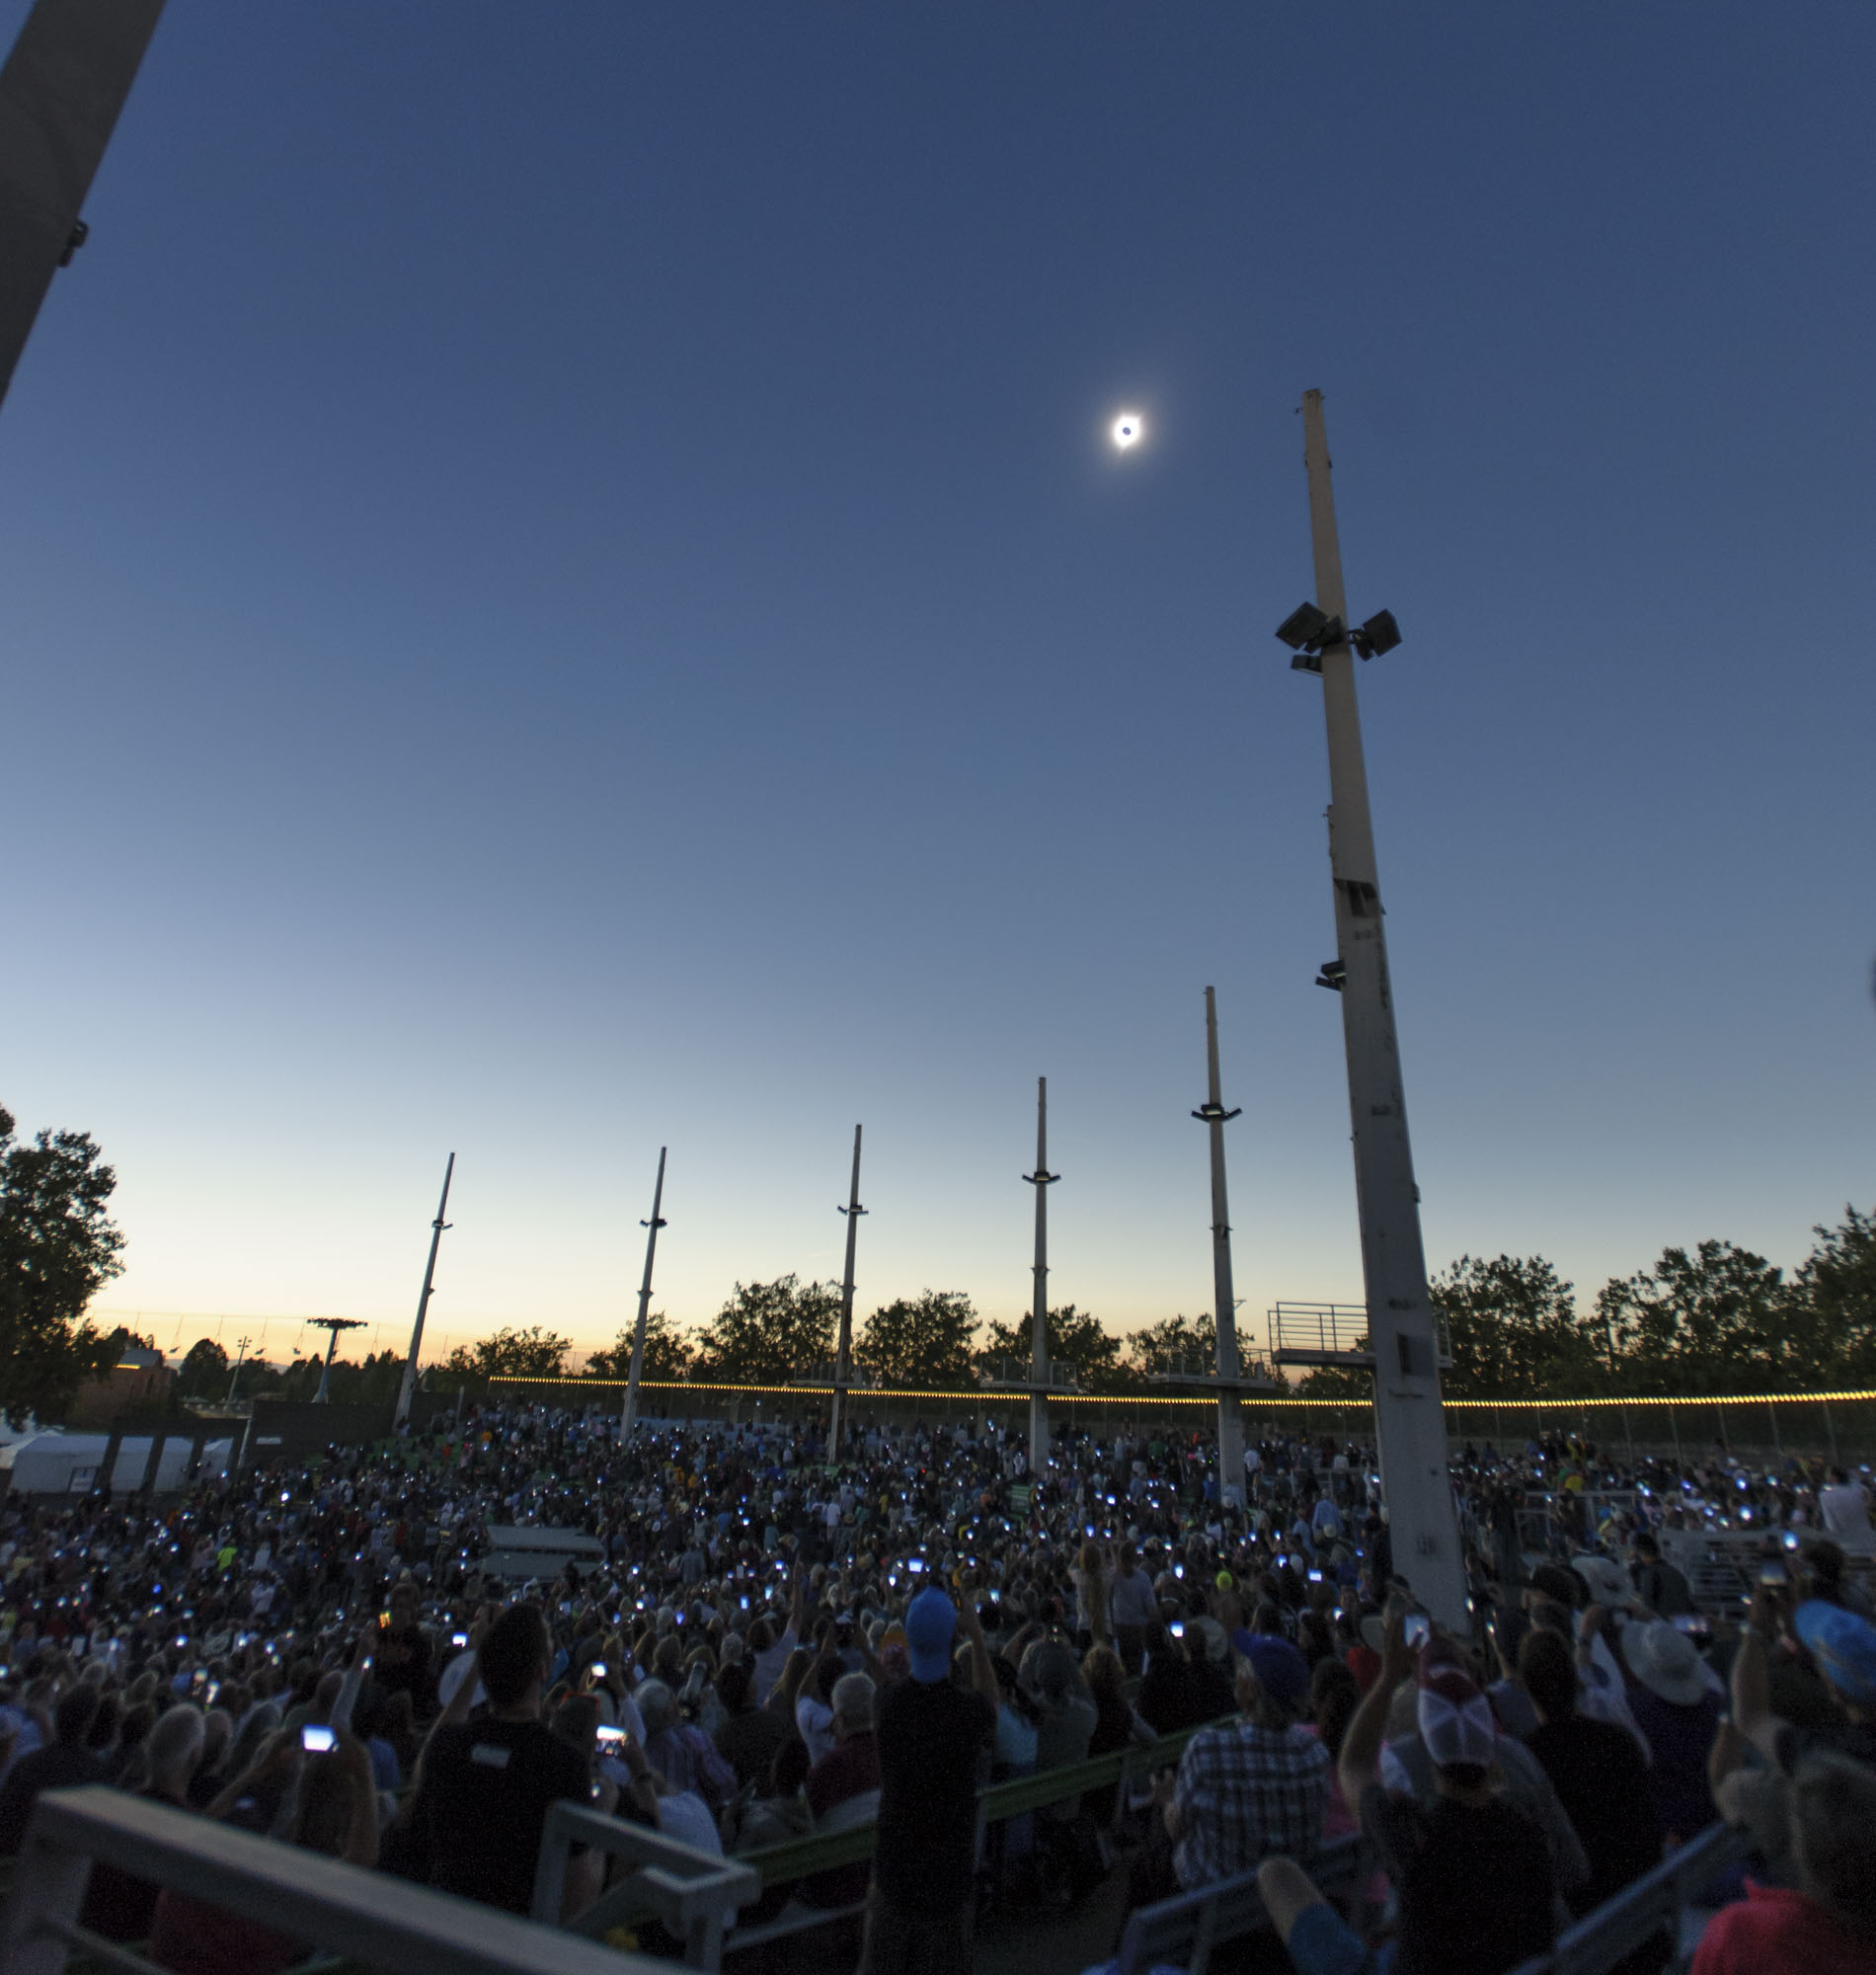 A large crowd of people stand under a totally eclipse Sun. The bright light of their cell phones is seen as they hold them up.